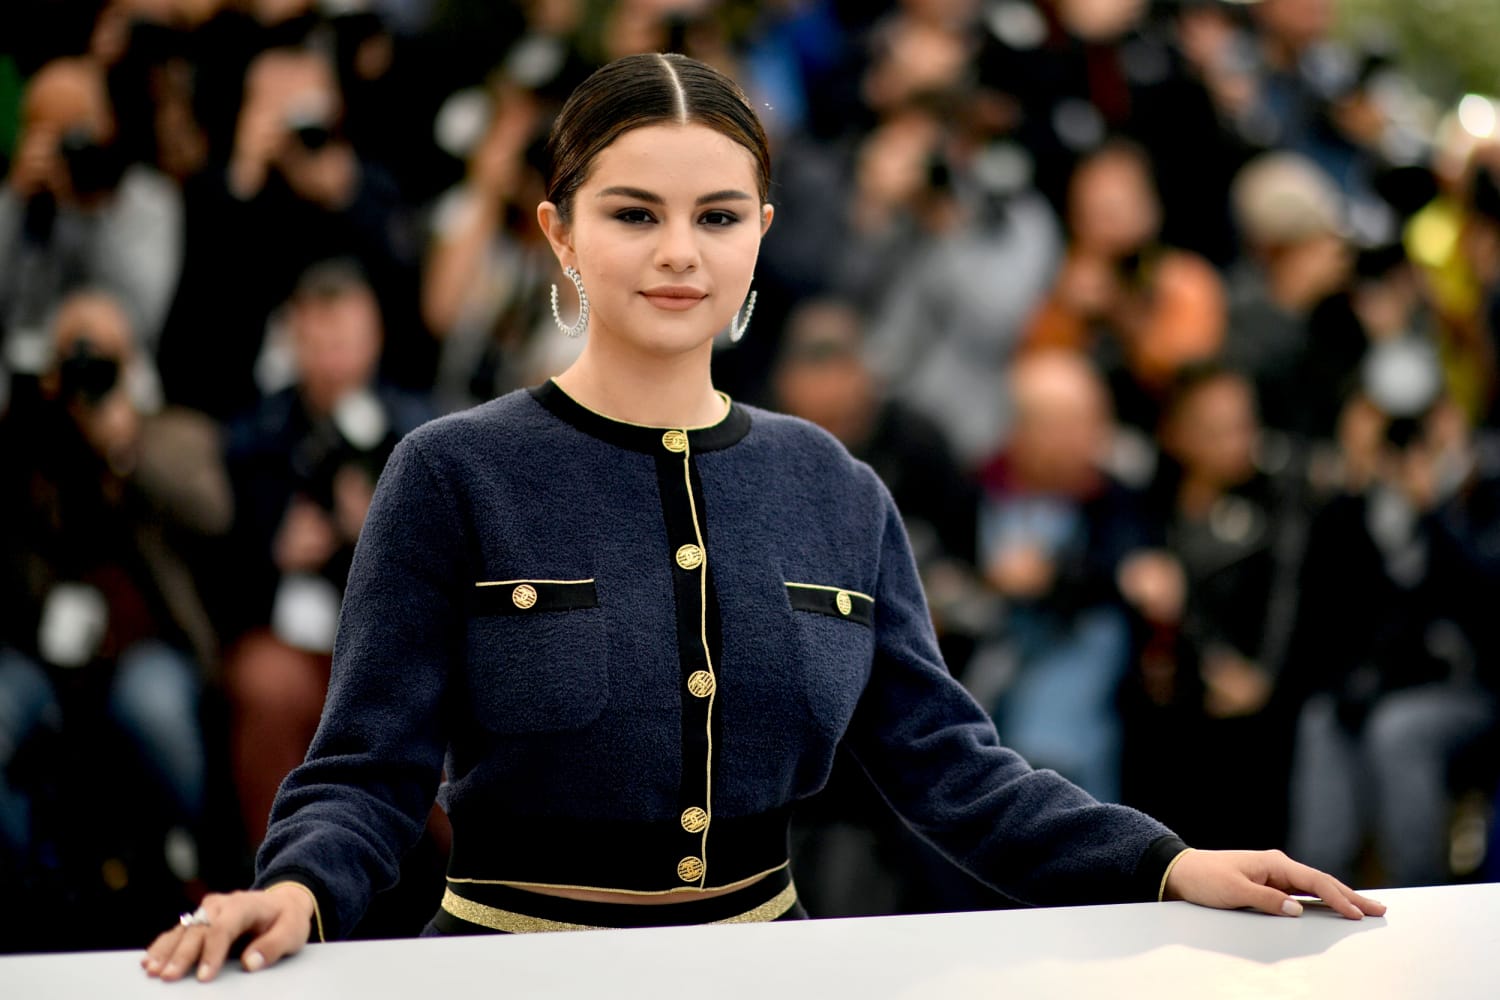 Selena Gomez Tackles Family S Immigration Story In Emotional Essay,Cats In Heat Behavior